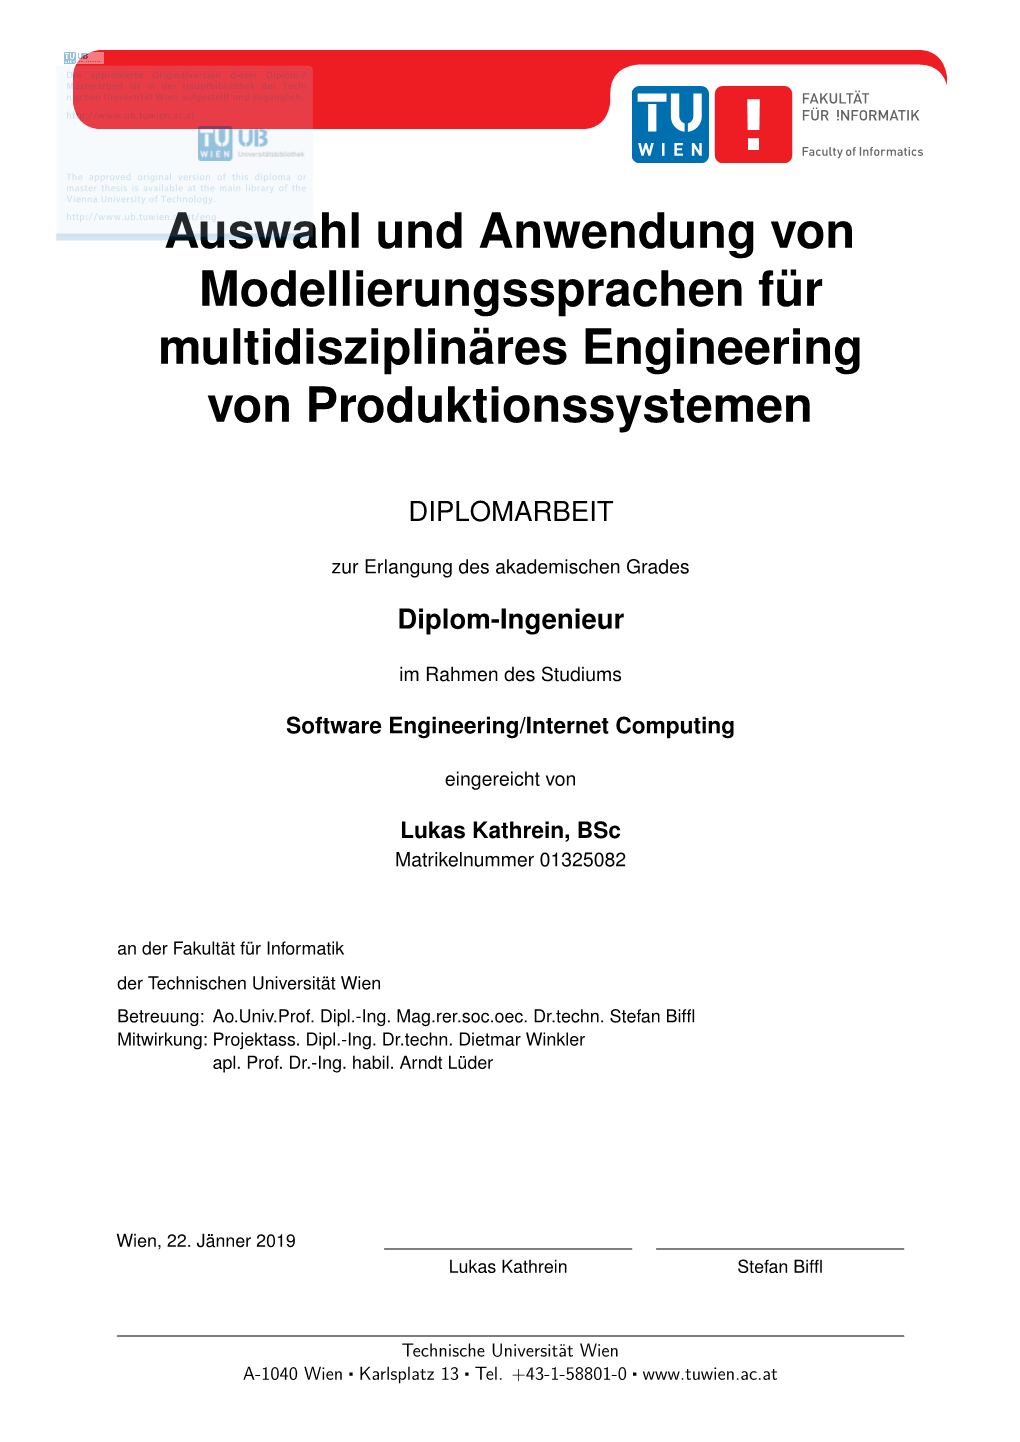 Modeling Language Selection and Application for Multi-Disciplinary Production Systems Engineering